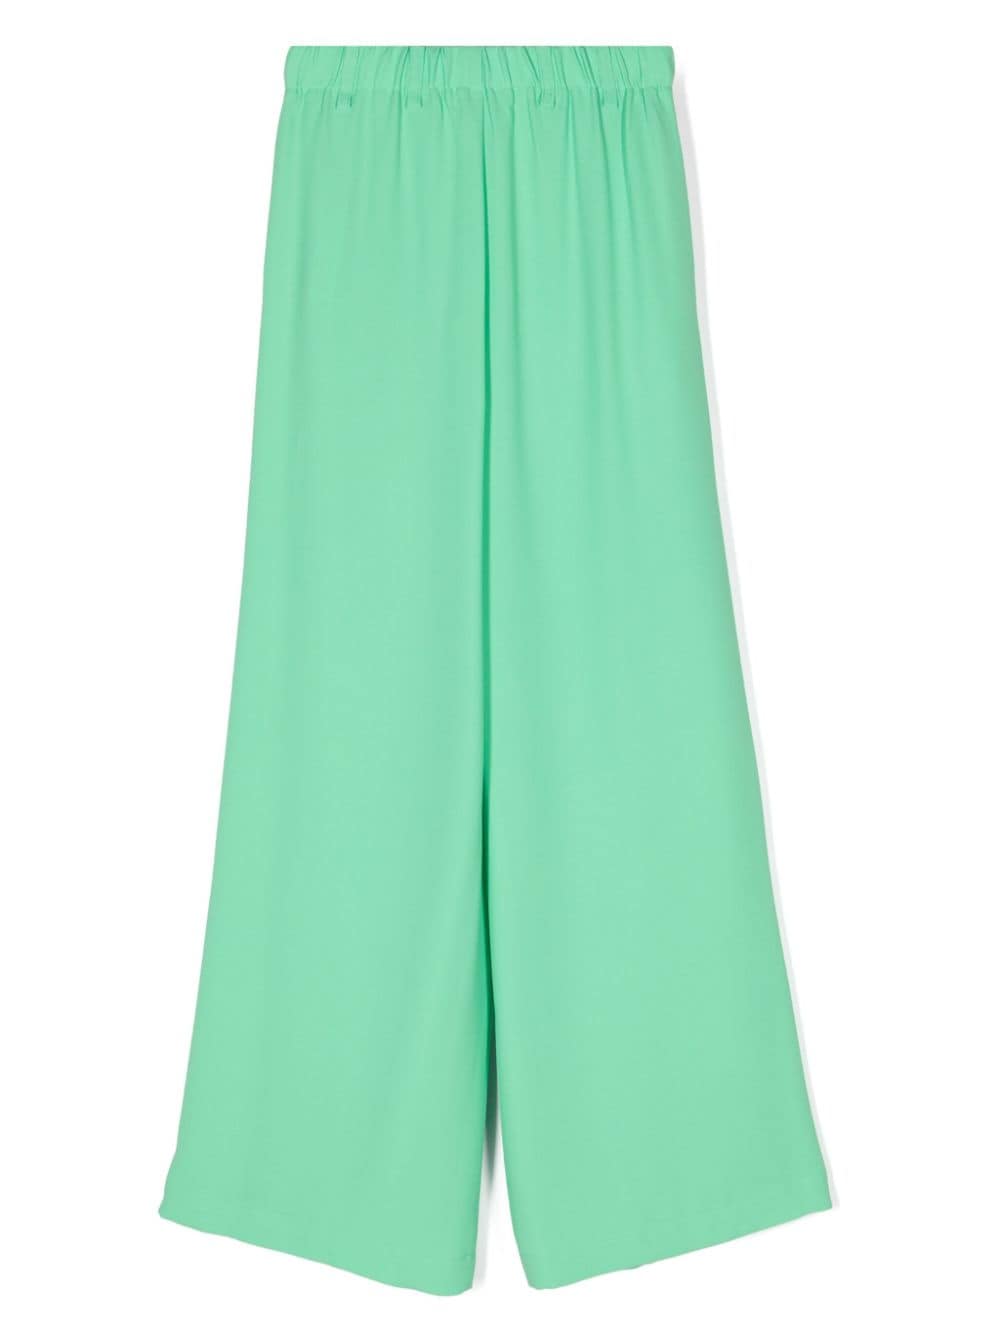 Green crepe trousers for girls